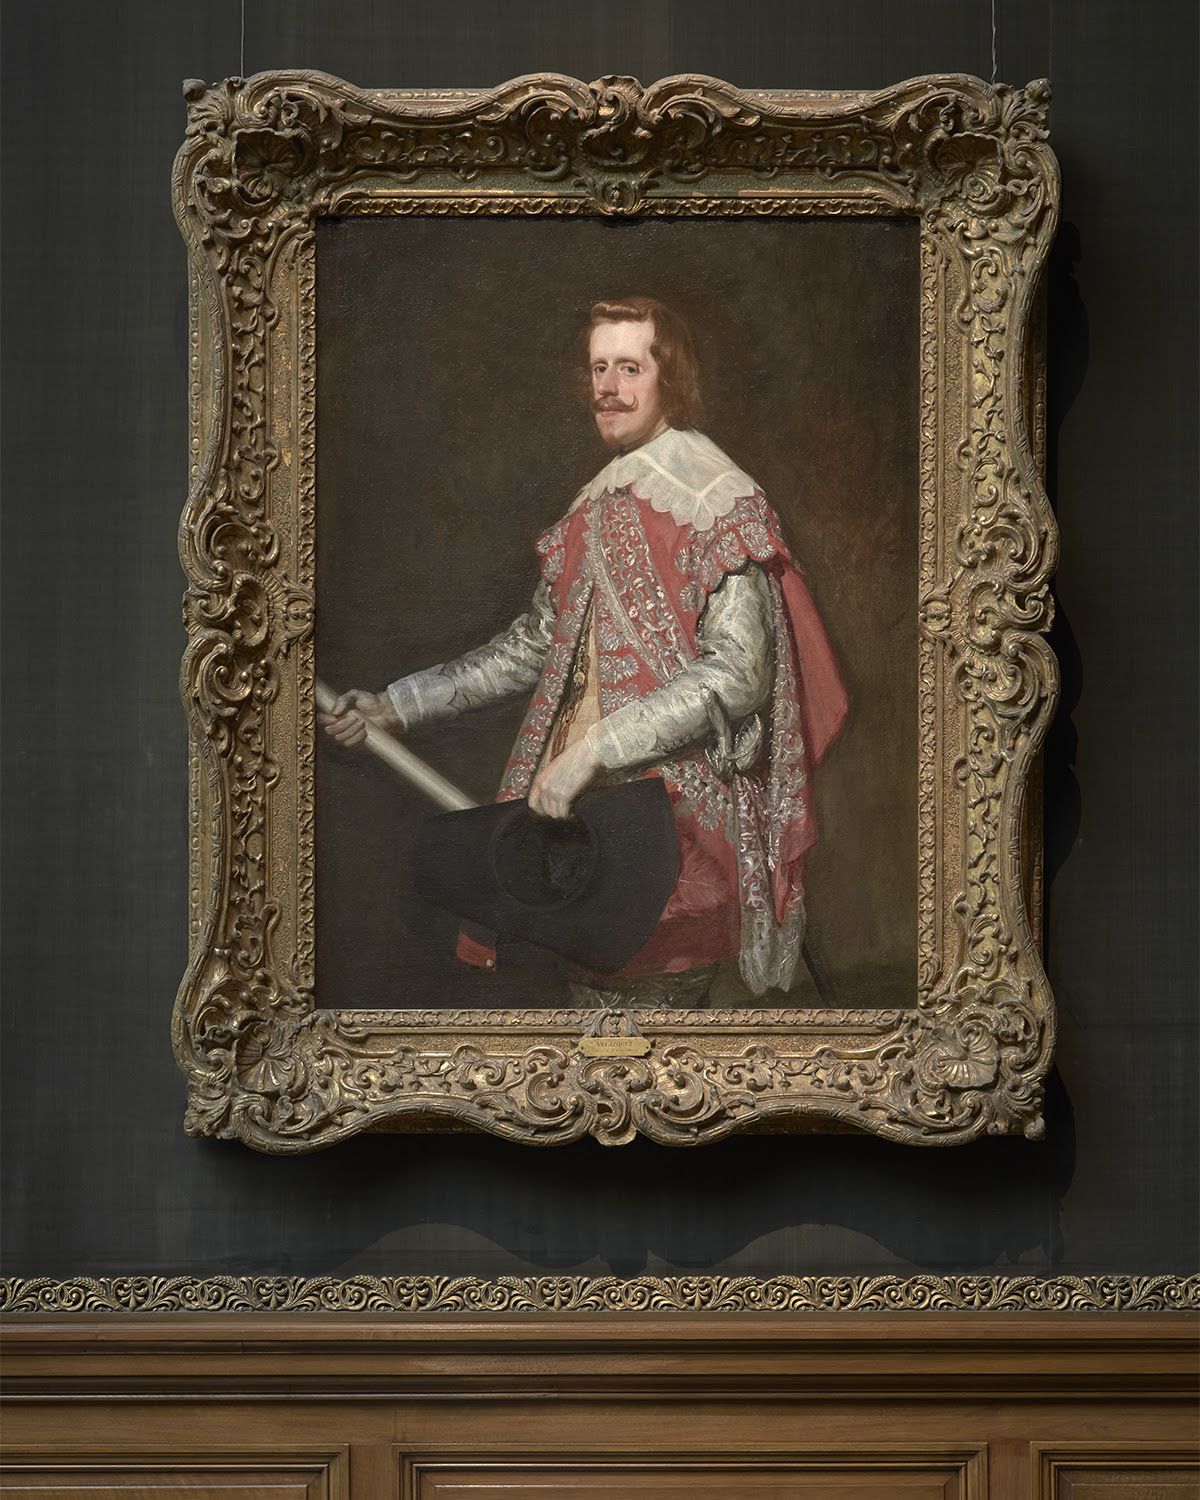 King Philip IV of Spain by Diego Velázquez